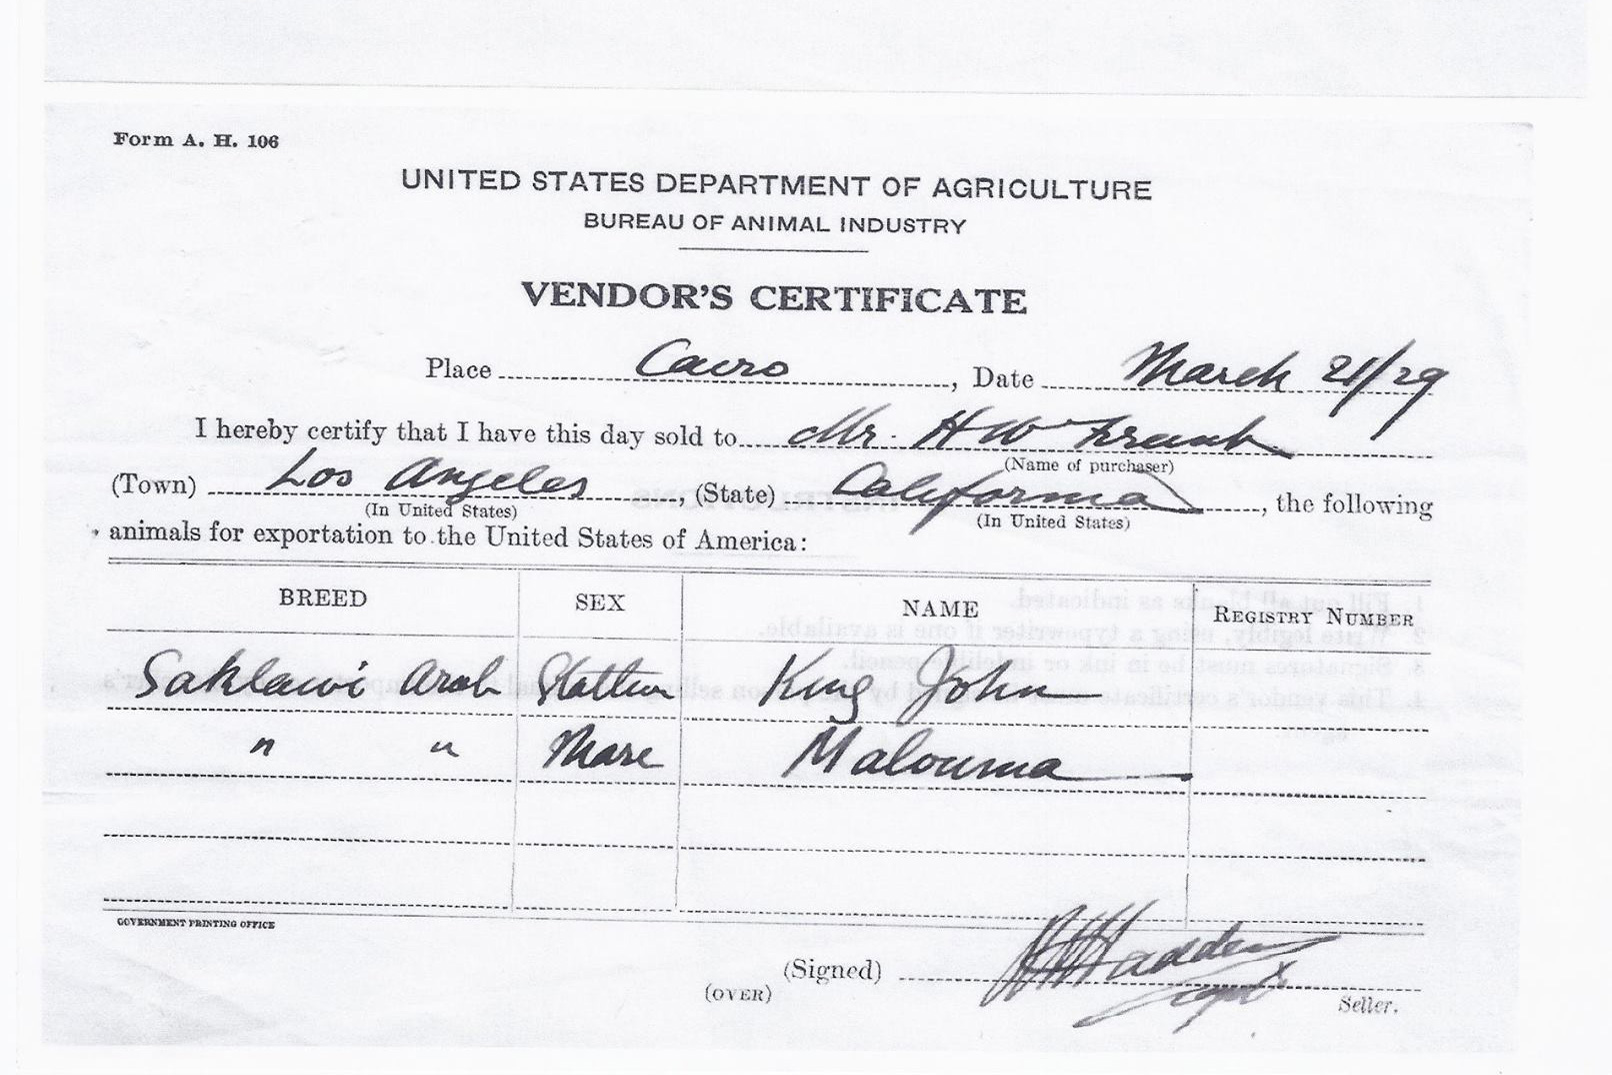 Document from the United States Department of Agriculture for importing King John and Malouma.